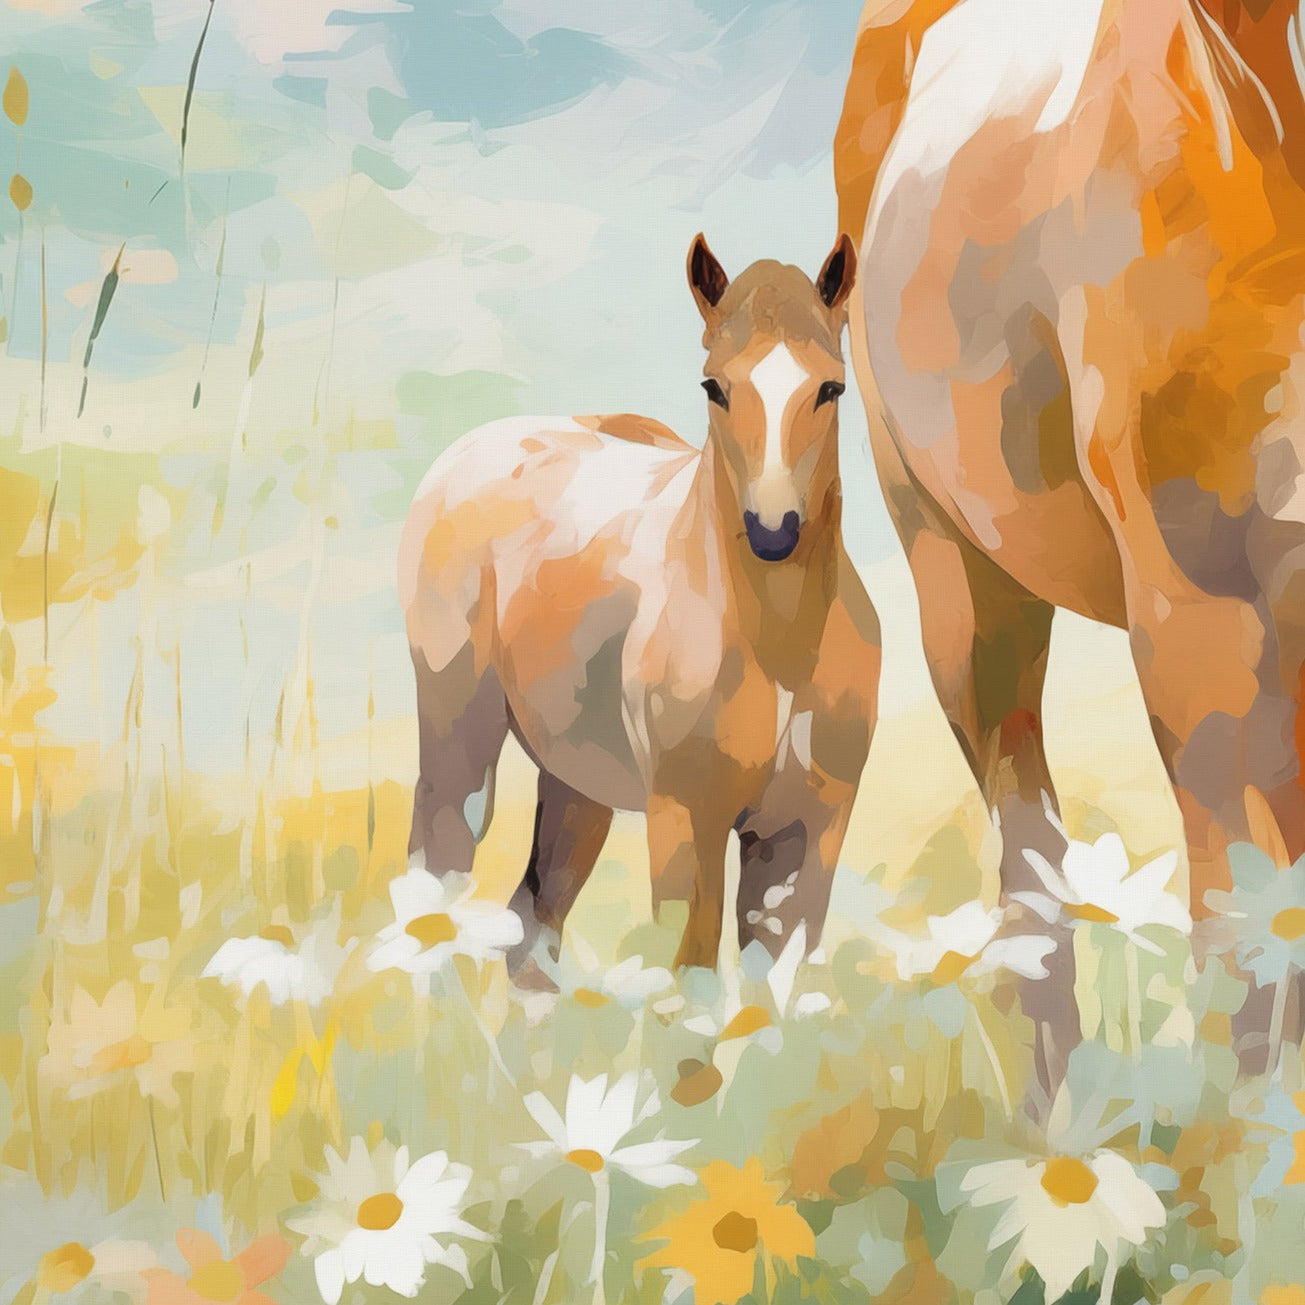 A serene digital painting of a palomino horse with its foal standing in a lush meadow filled with white daisies and orange wildflowers under a partly cloudy sky.